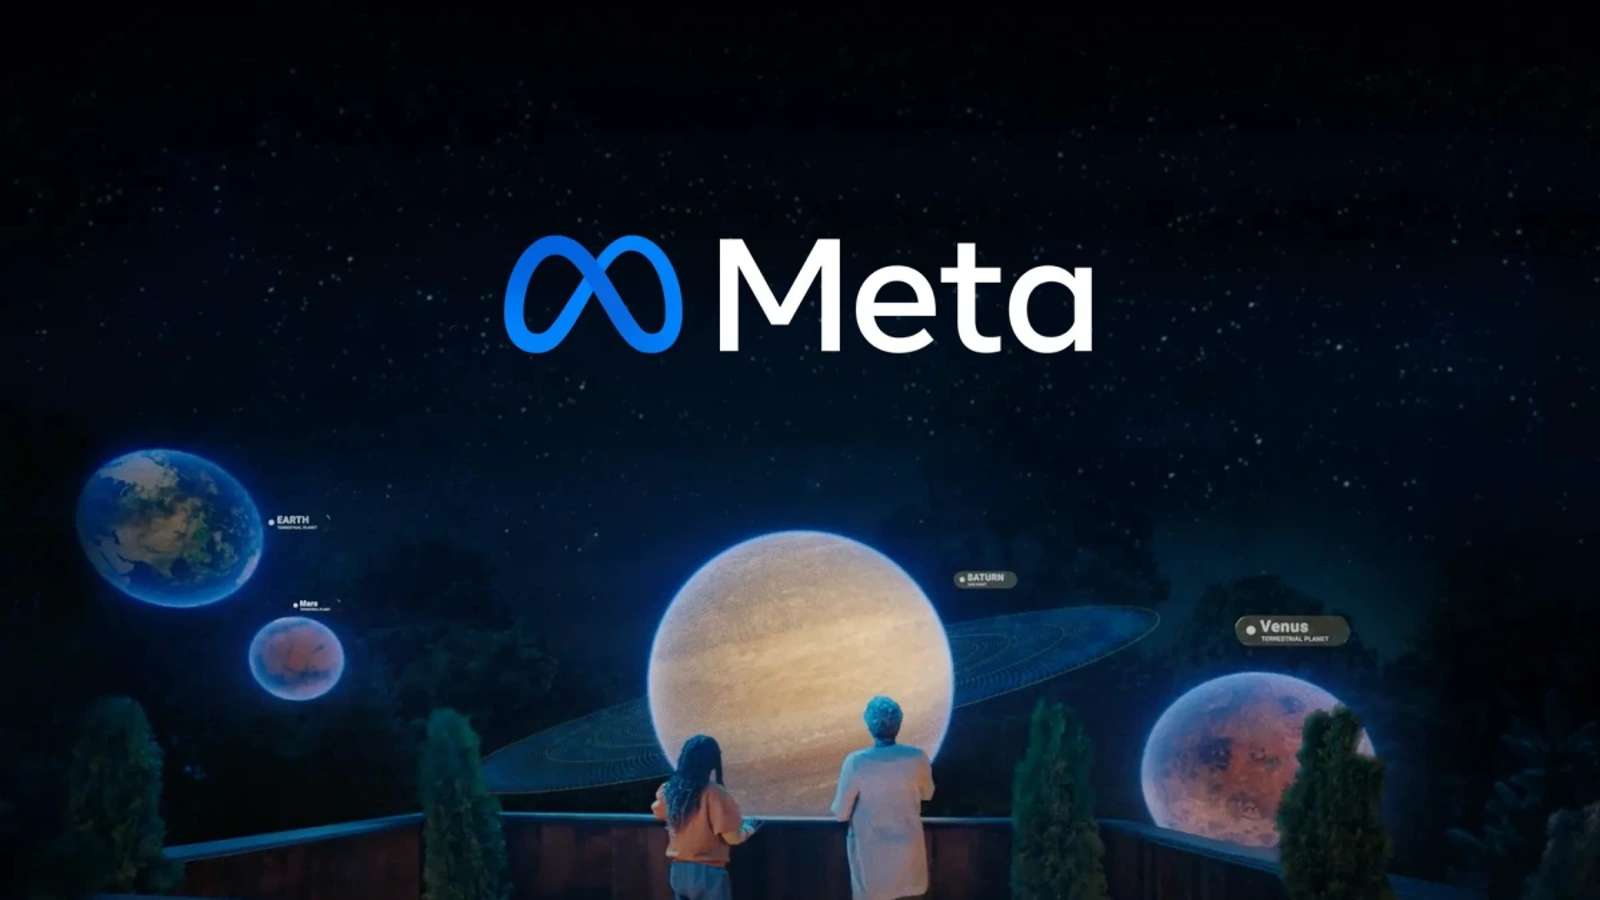 Meta is the new umbrella that Facebook, Instagram, WhatsApp, and more are hosted under.